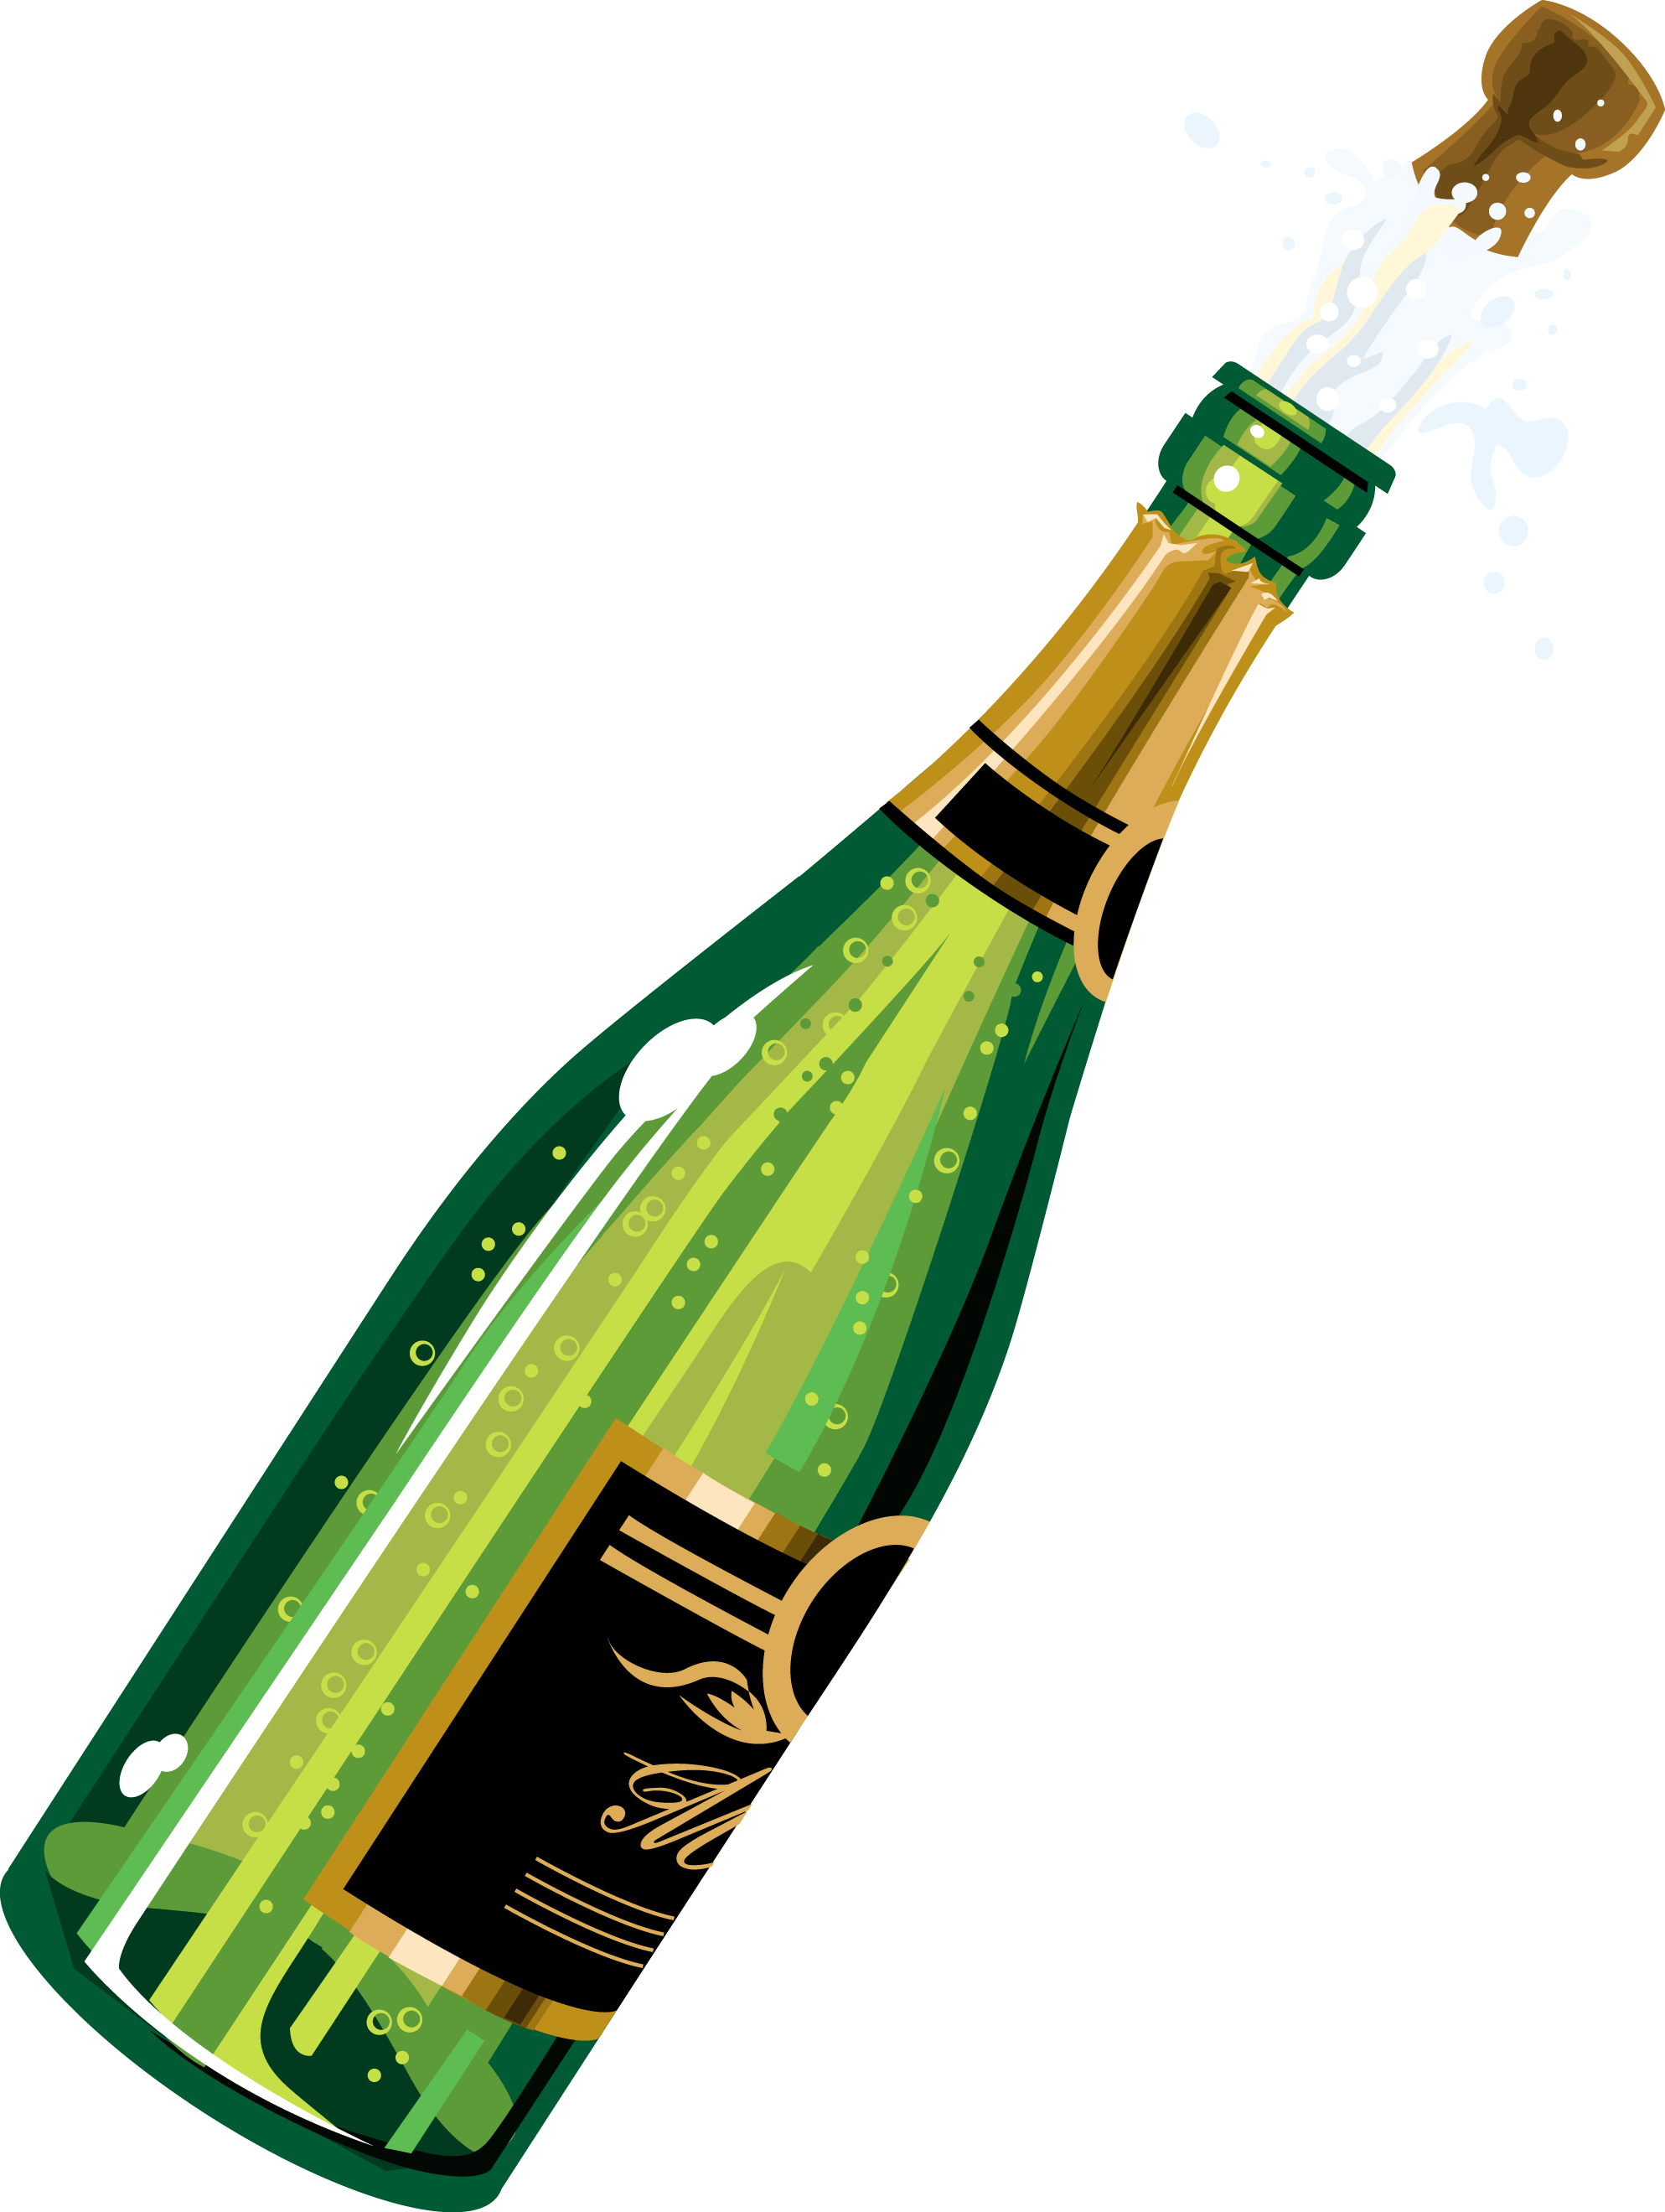 Free Champagne Bottle Cliparts, Download Free Clip Art, Free.